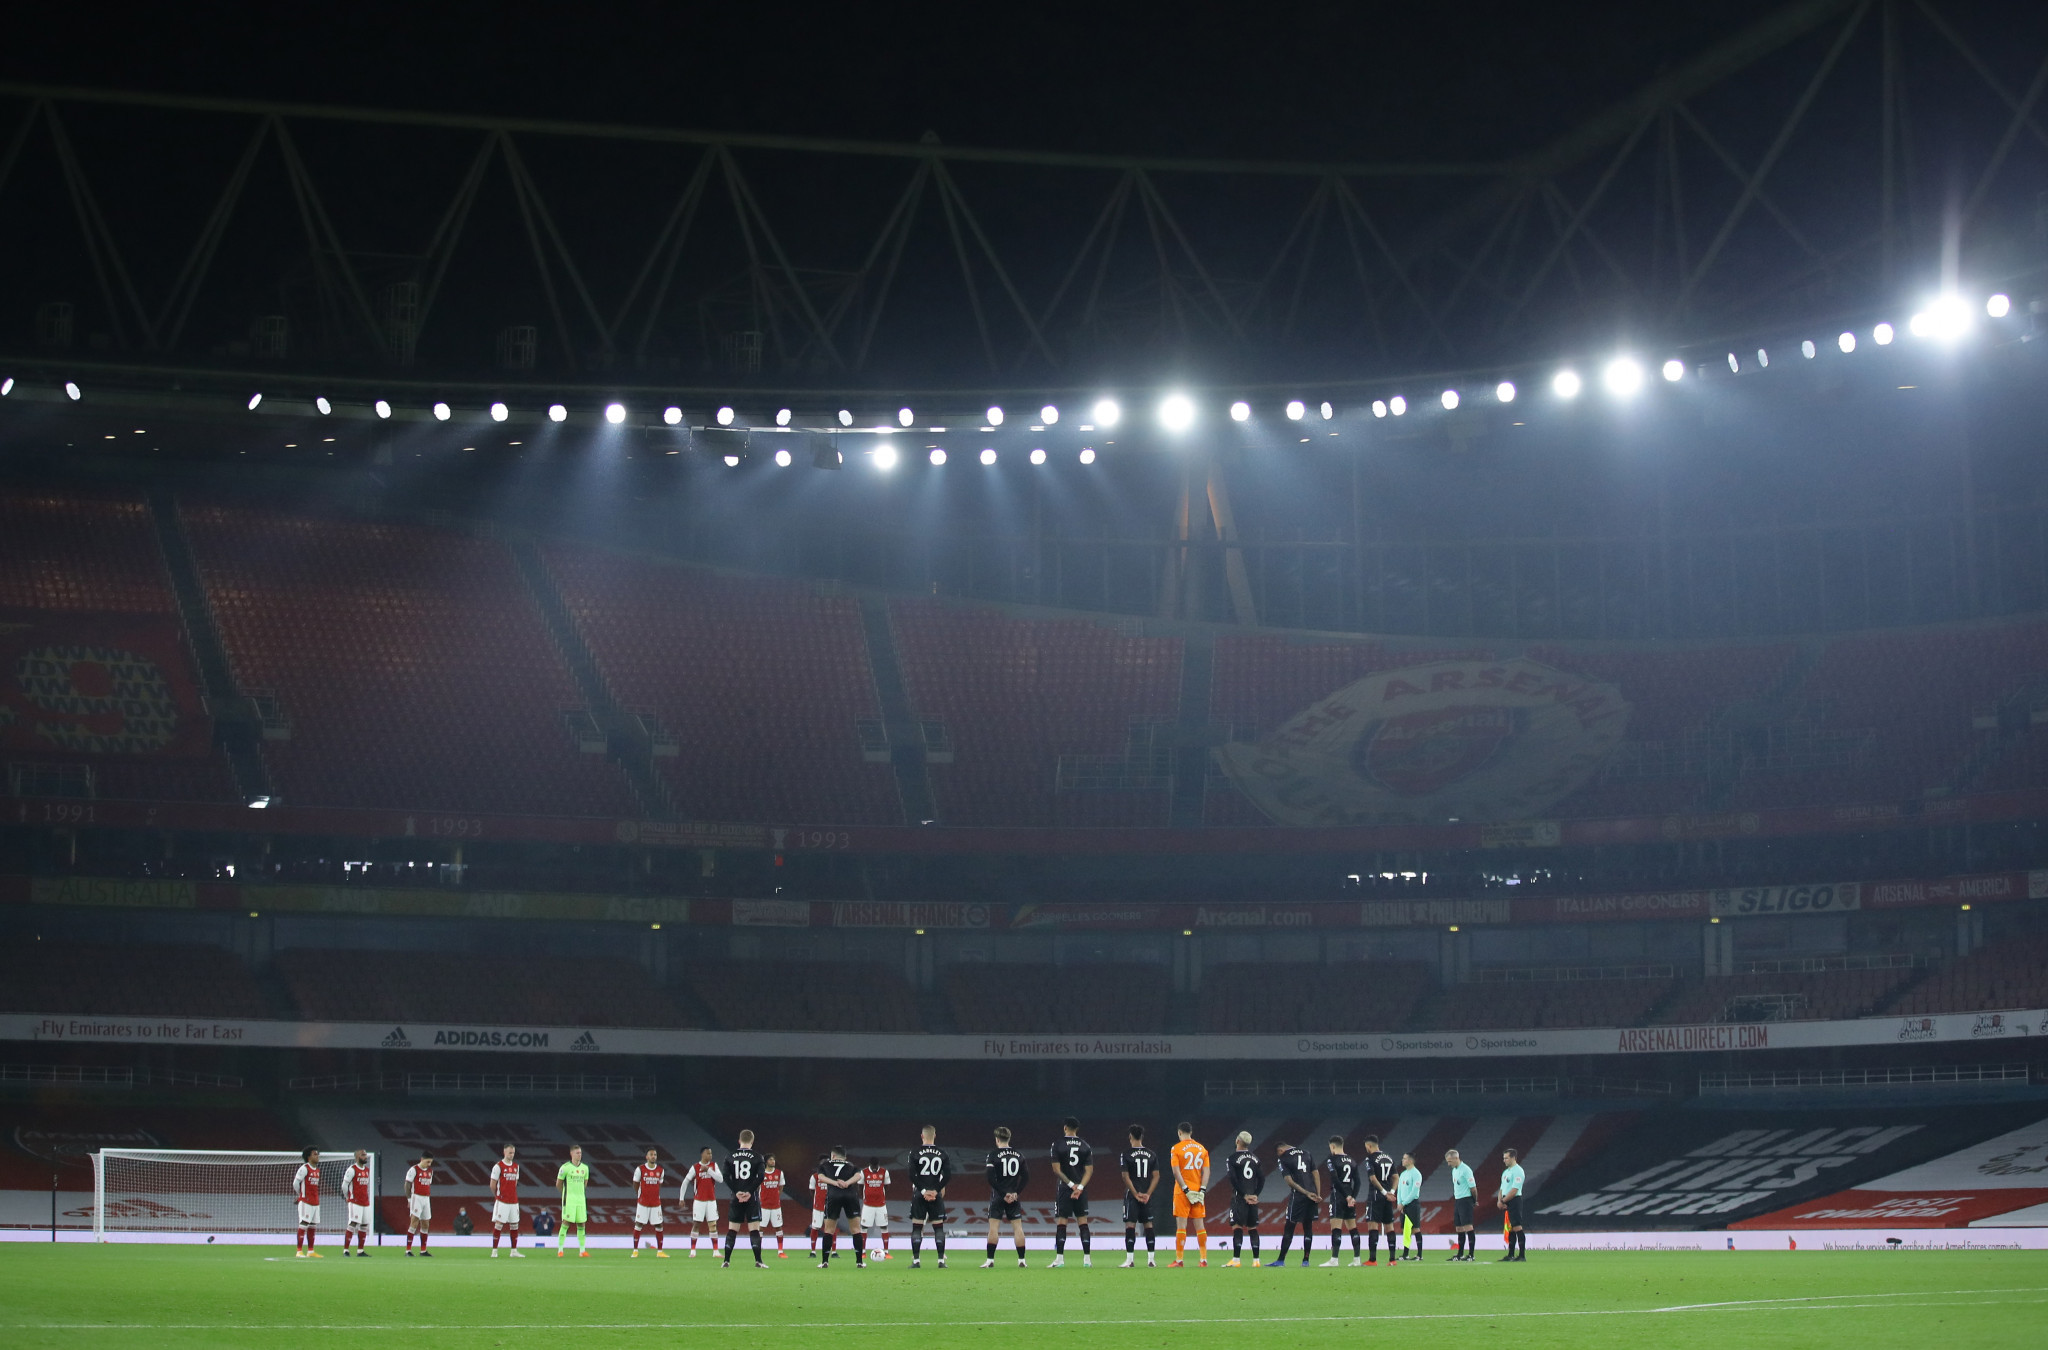 The Emirates Group is best known in sports sponsorship terms for its association with Arsenal Football Club ©Getty Images